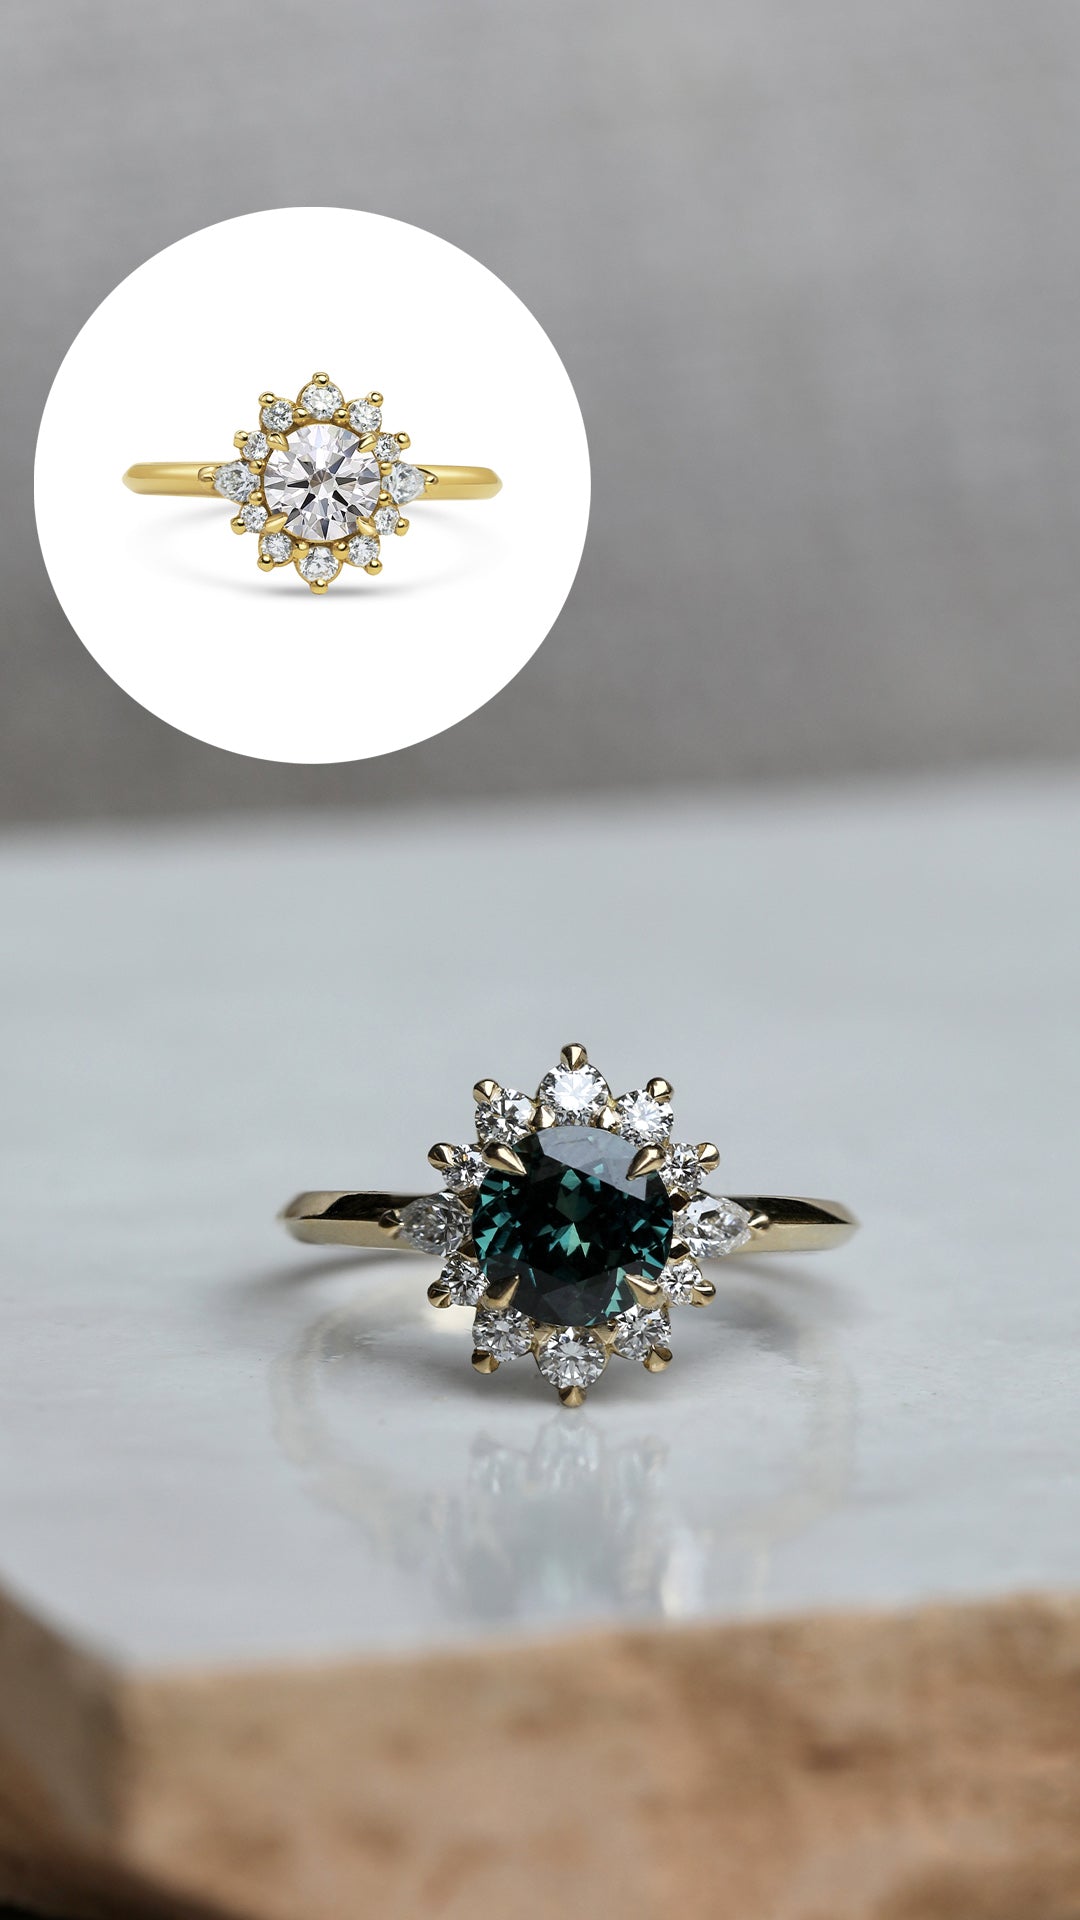 The Styx sapphire engagement ring, a bespoke recreation of the Styx white diamond ring featuring a green sapphire and white diamond halo